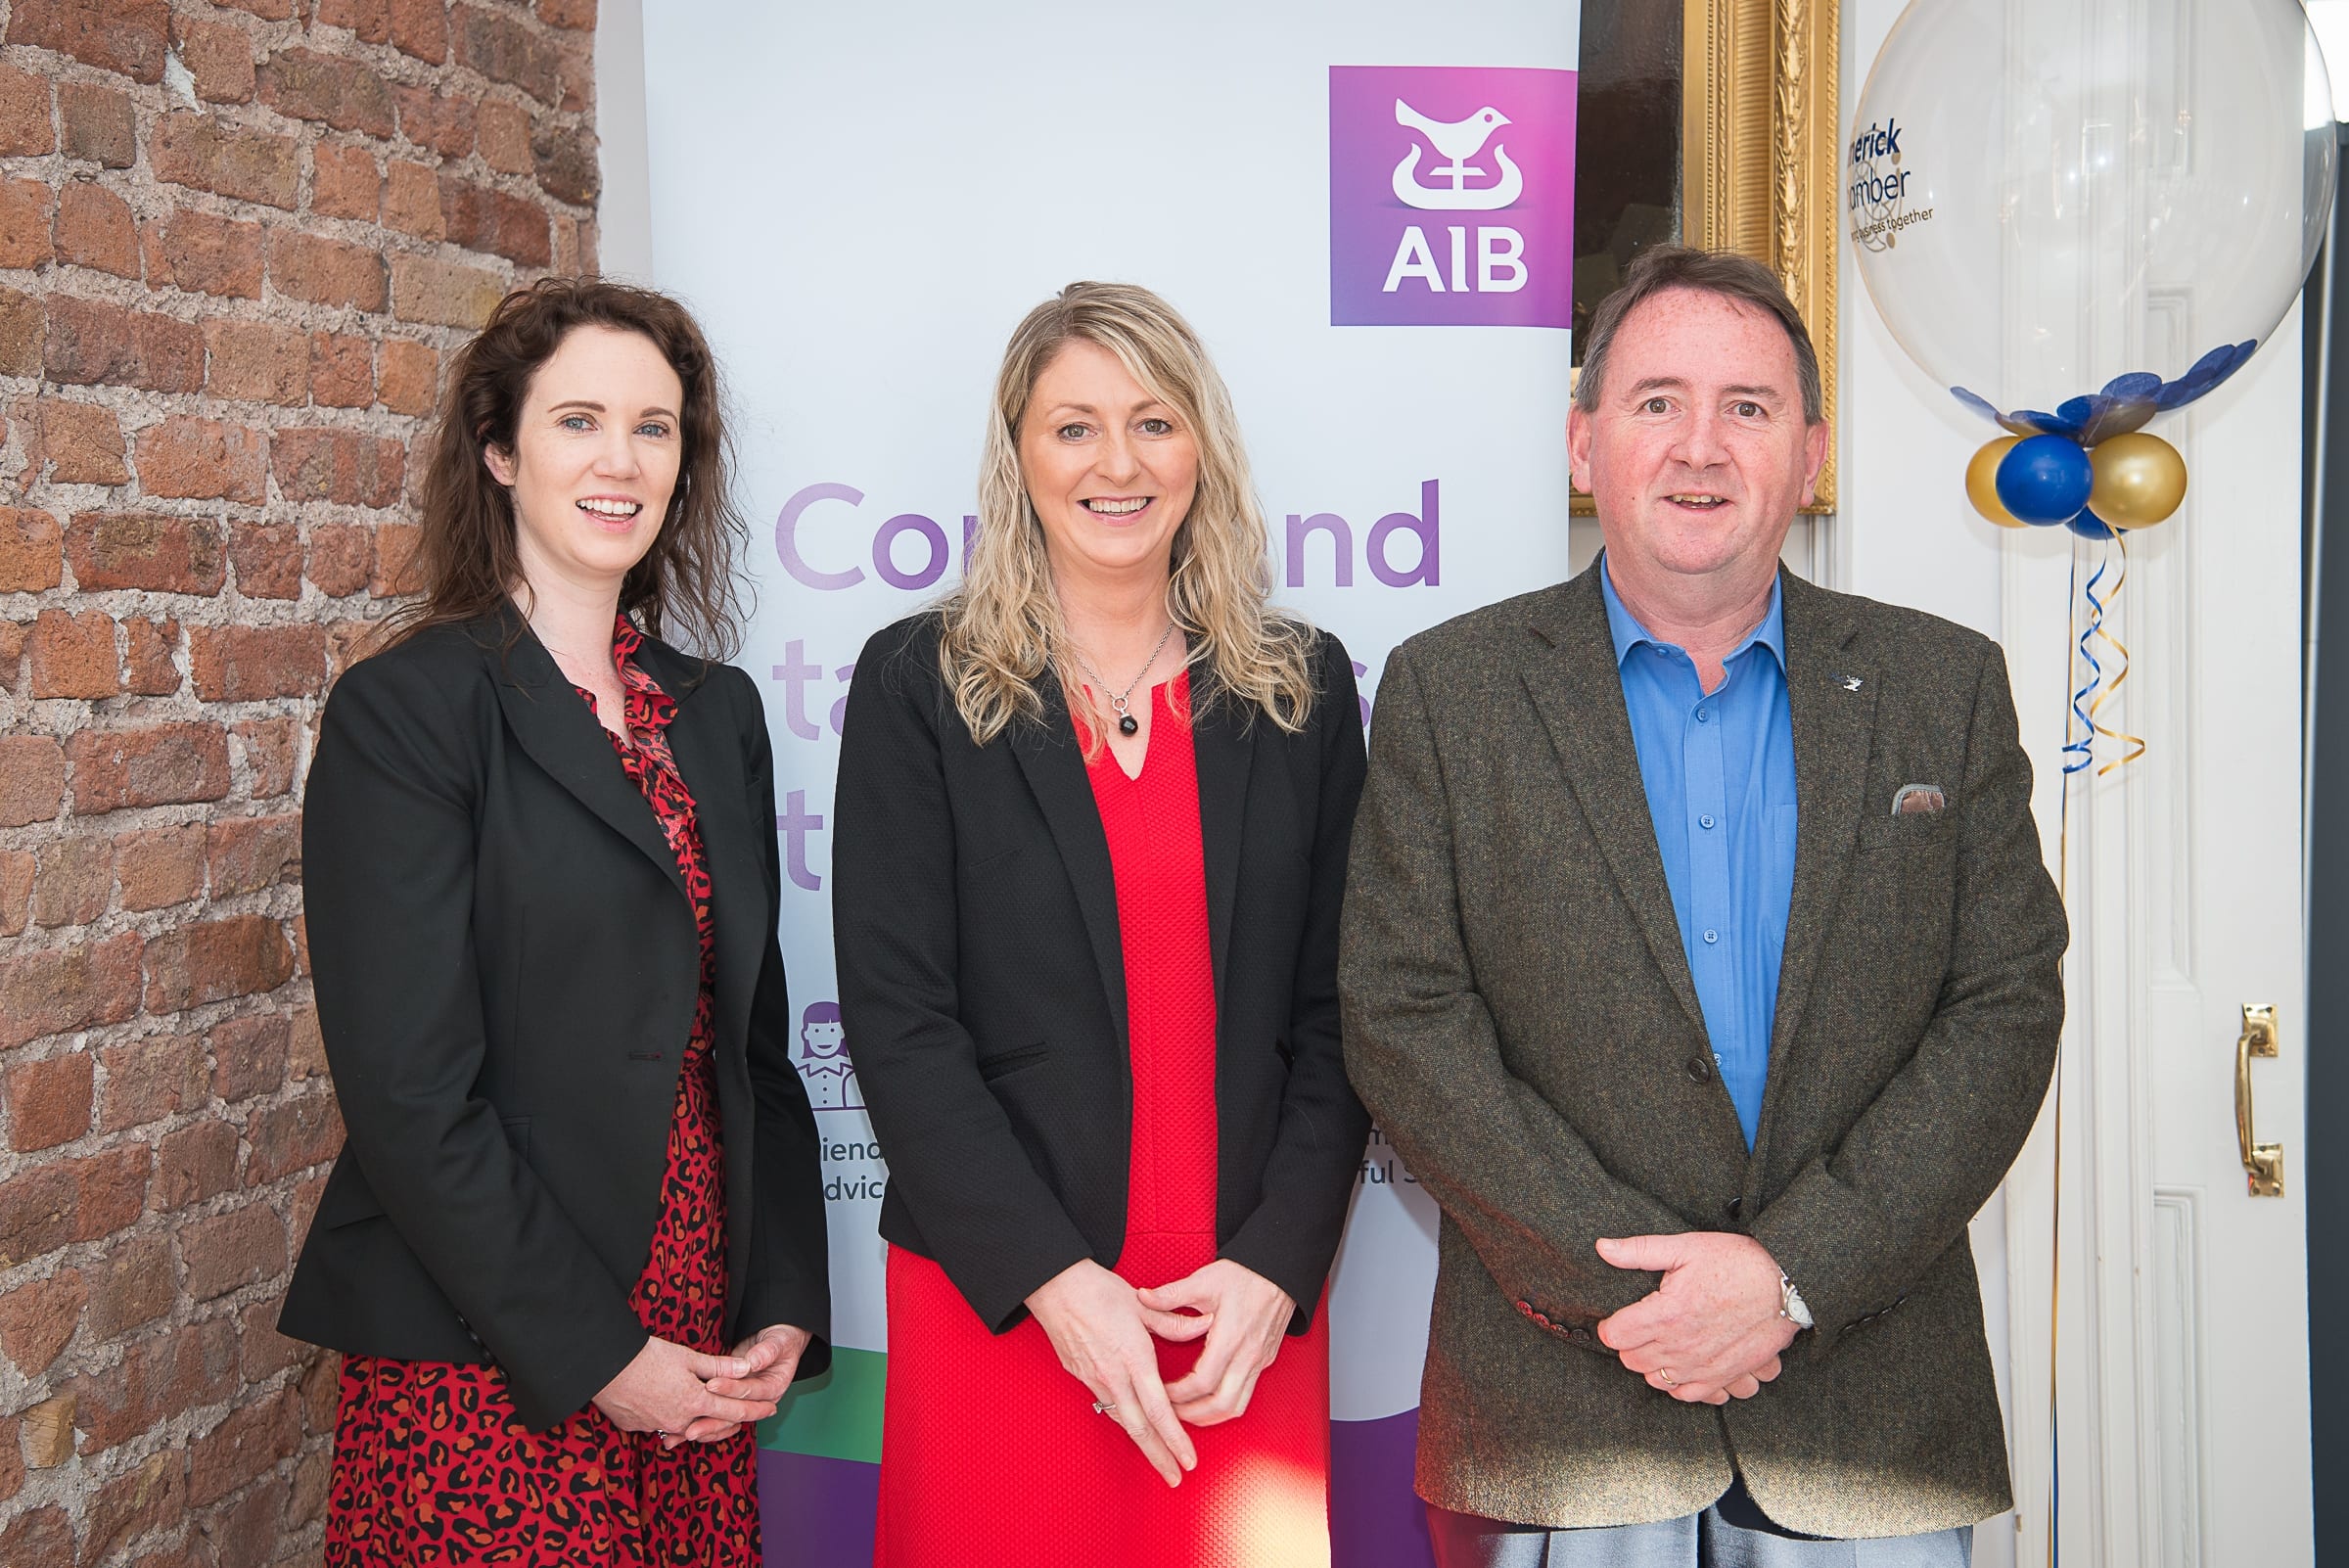 no repro fee- 
From Left to Right:  New Members Breakfast which took place on the 7th June in the Limerick Chamber Boardroom:  Mary McNamee - Limerick Chamber, Jean Creagh - AIB, John Murphy - Liscastle Consultancy Services Ltd. 
Photo by Morning Star Photography